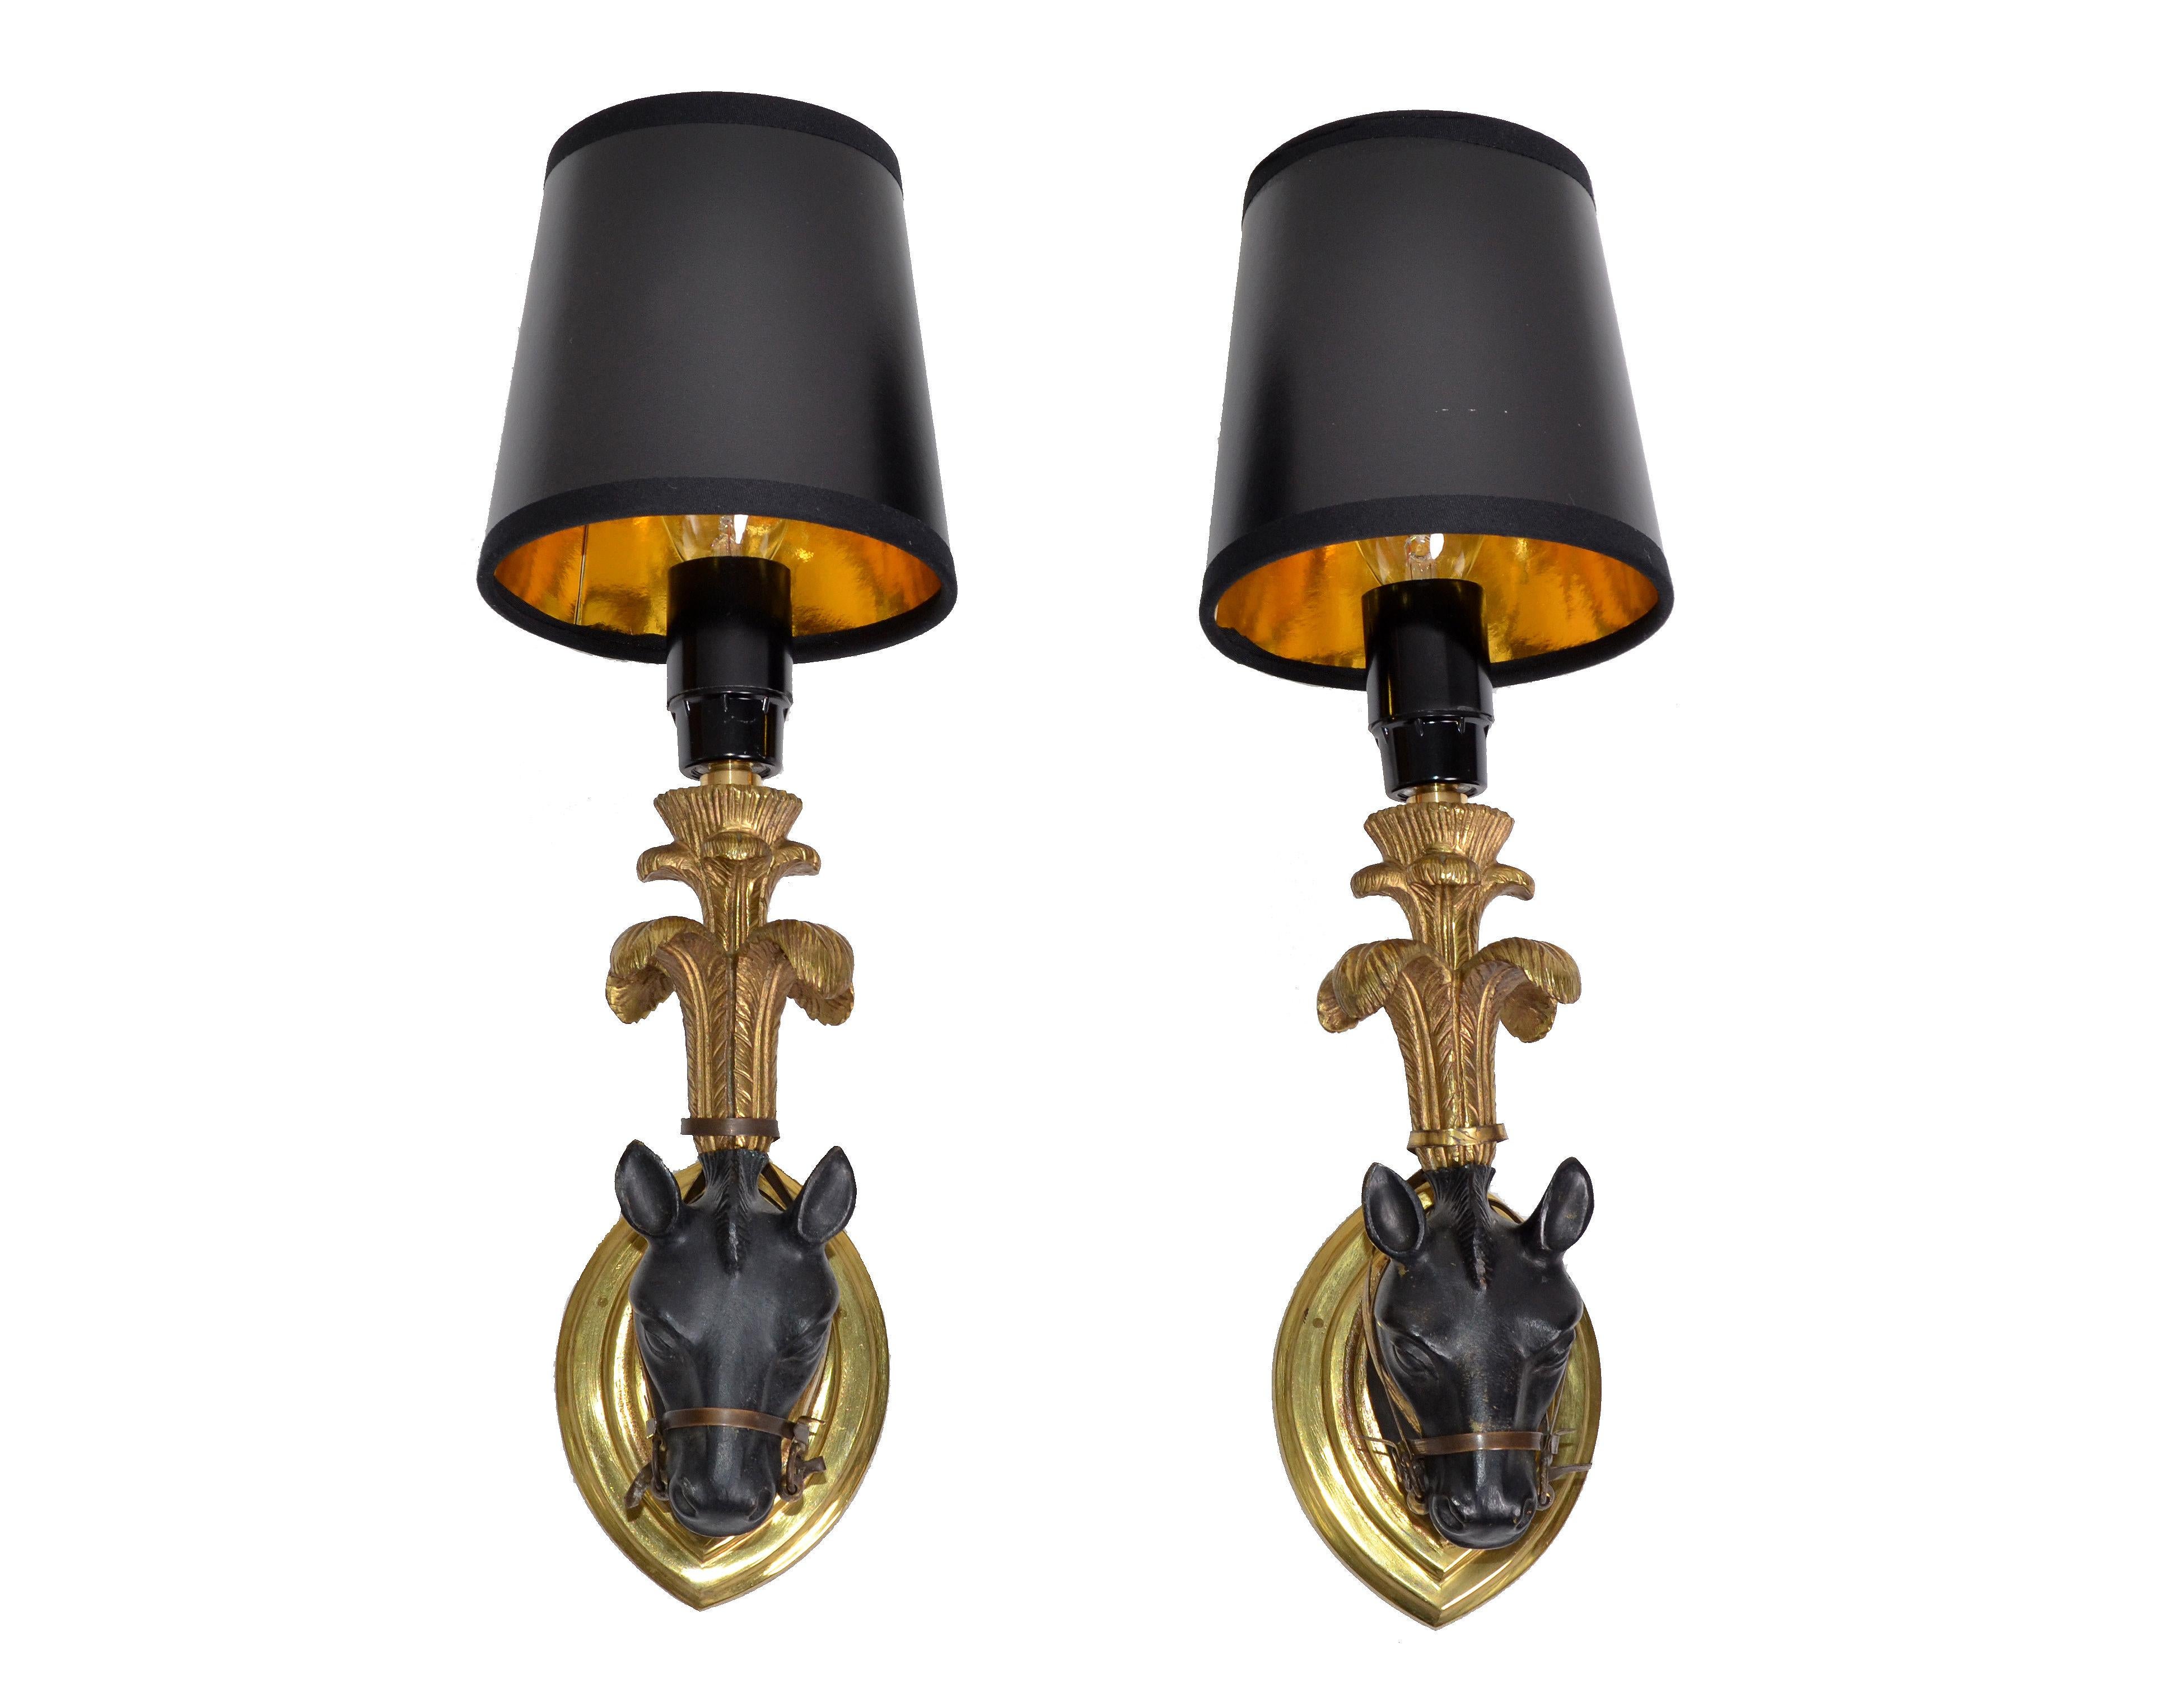 Superb pair of French Bronze Mid-Century Modern horse sconces.
US rewired and in working condition.
1 bulb 25 watt max.
Measures: Back-plate: 3 inches W, 4.2 inches H.
Have a look on our impressive collection of French and Italian Sconces.
More than